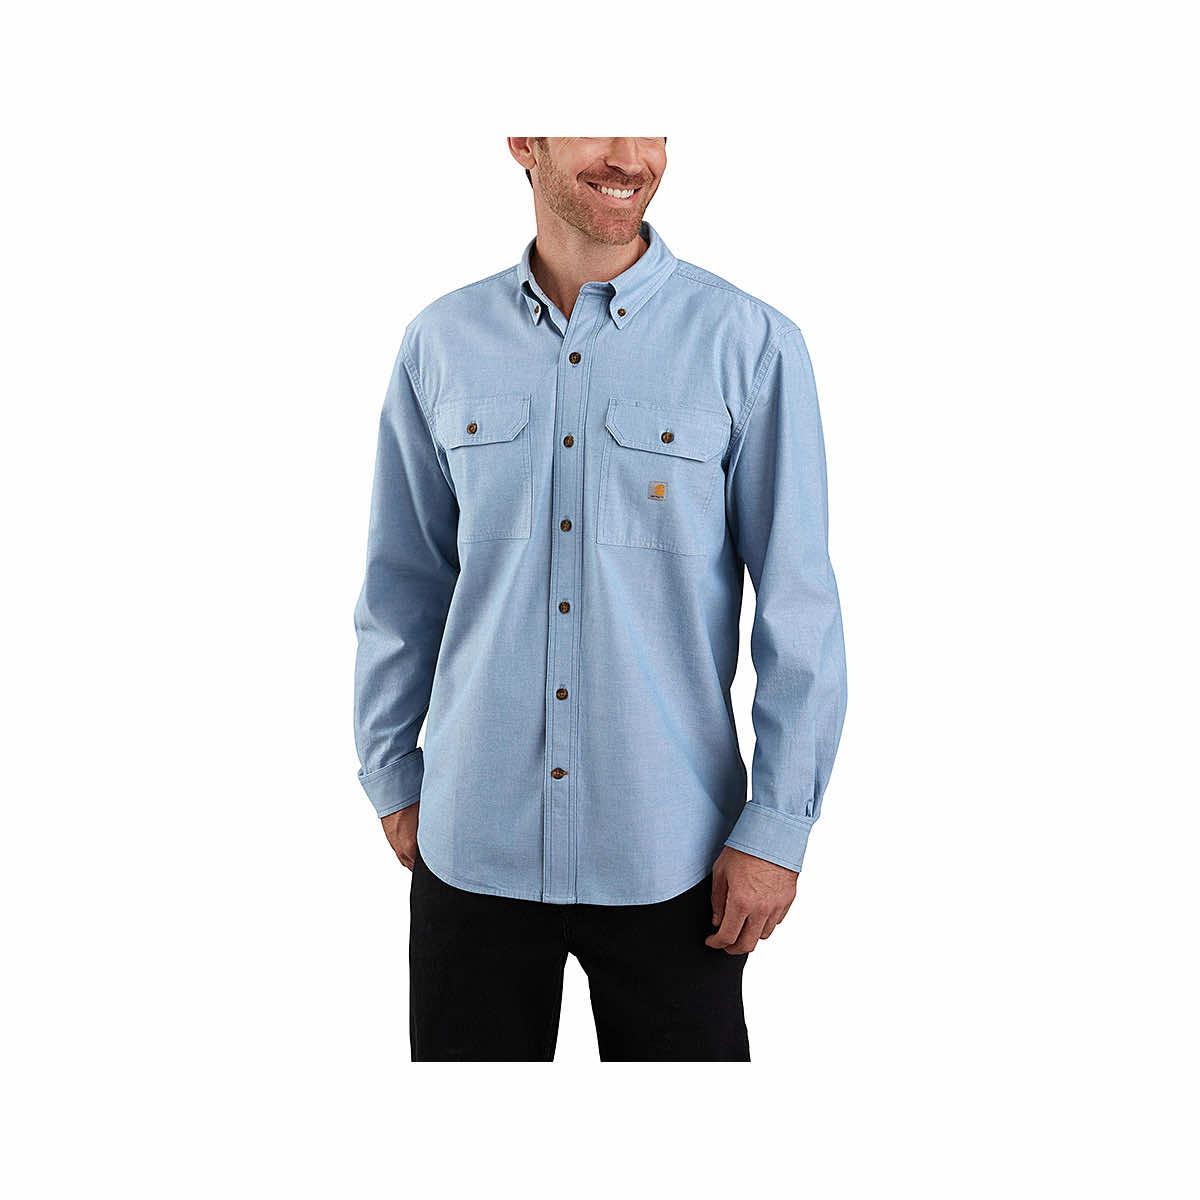  Men's Loose Fit Midweight Chambray Long Sleeve Shirt